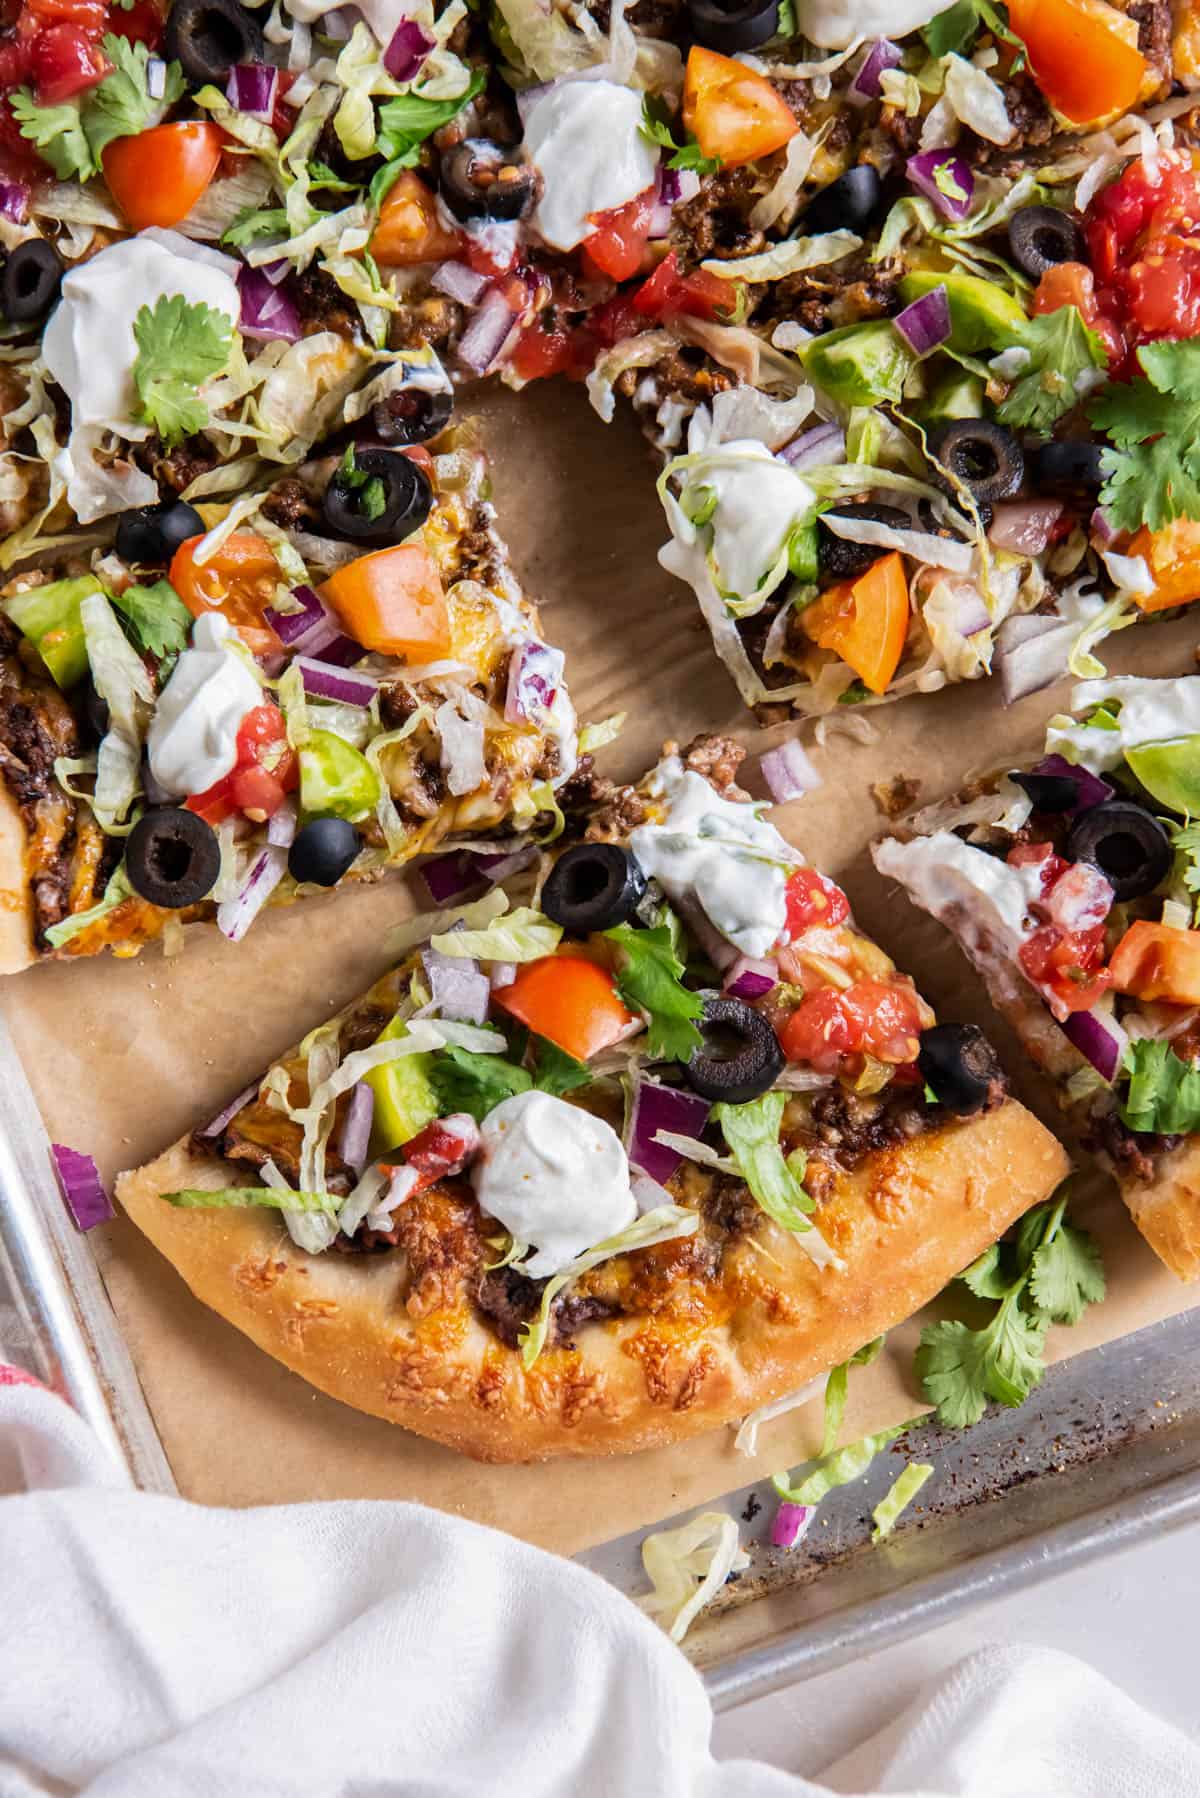 Taco pizza is cut into slices on a piece of parchment paper before serving.